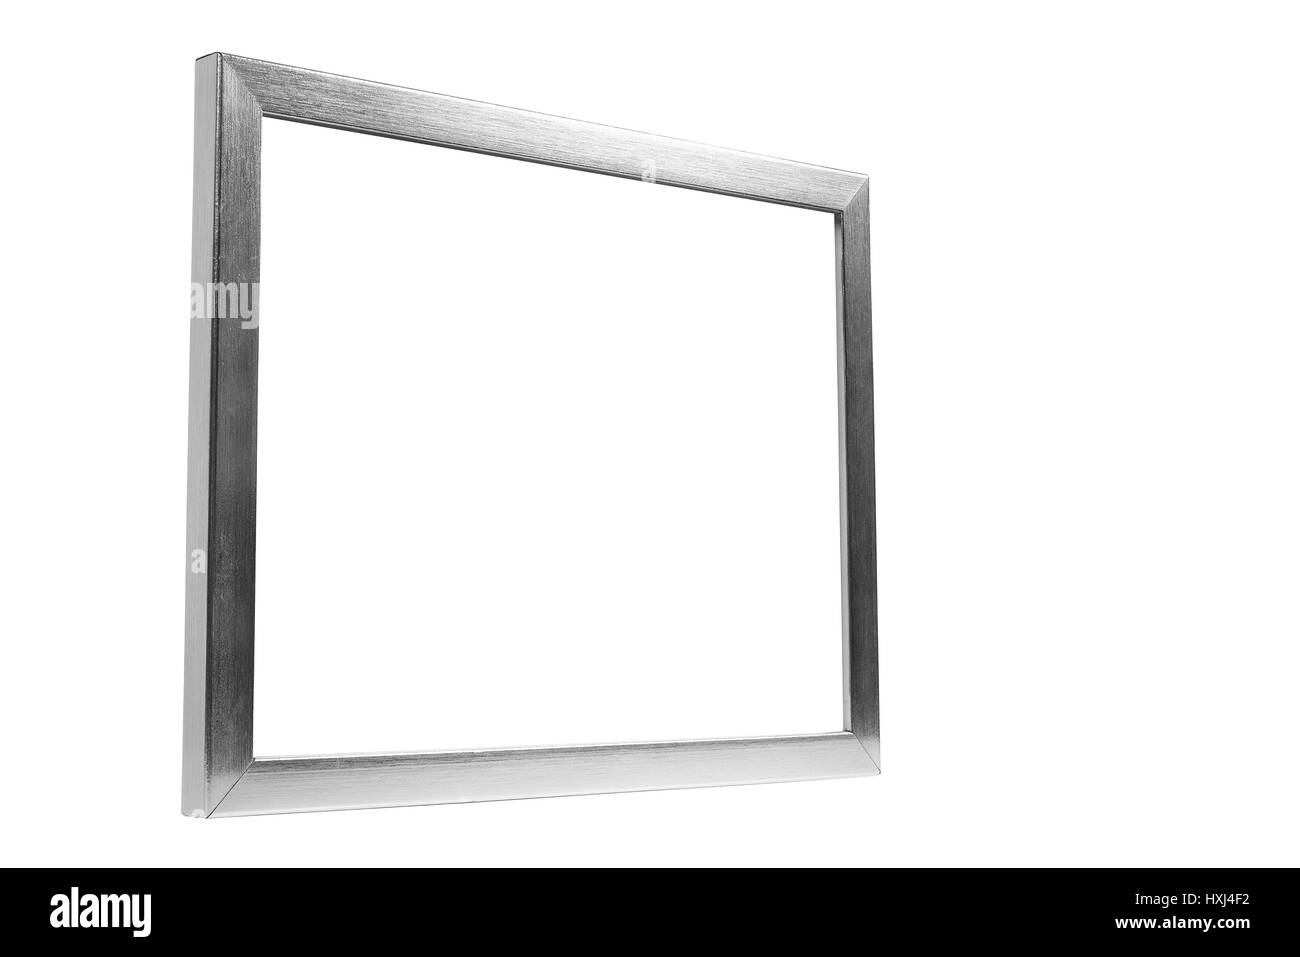 Aluminum decorative photo frame isolated on white background with clipping path Stock Photo